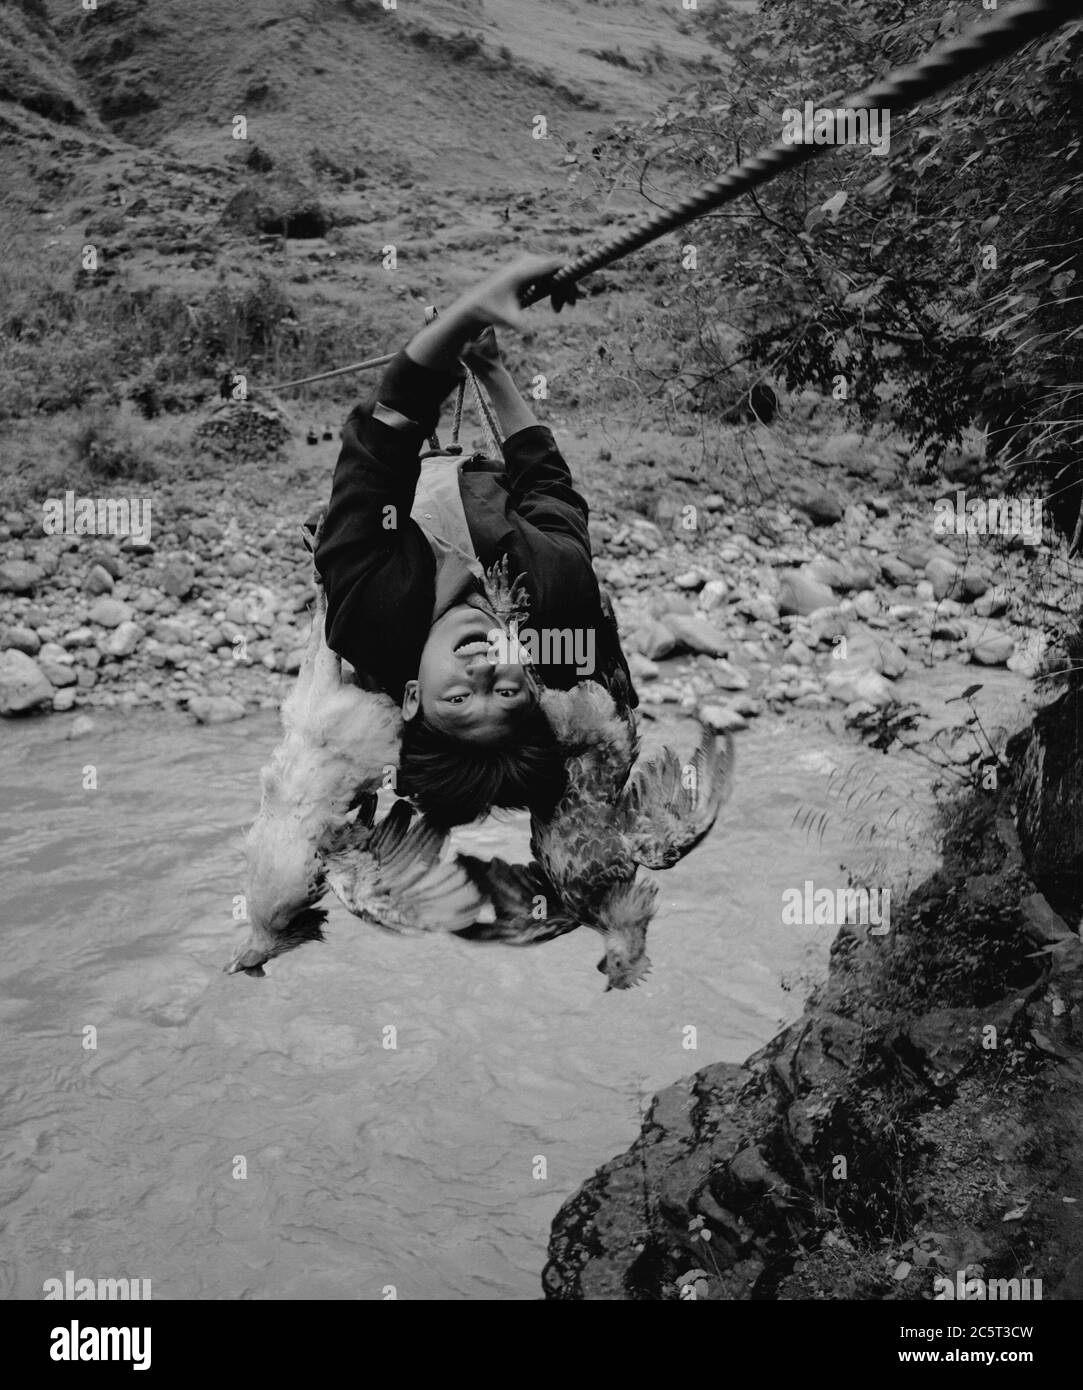 Butuo. 5th July, 2020. File photo taken on March 21, 2006 shows a villager passing the Xixi River by using a cable in Abuluoha Village, southwest China's Sichuan Province. TO GO WITH XINHUA HEADLINES OF JULY 5, 2020 Credit: Lin Qiang/Xinhua/Alamy Live News Stock Photo